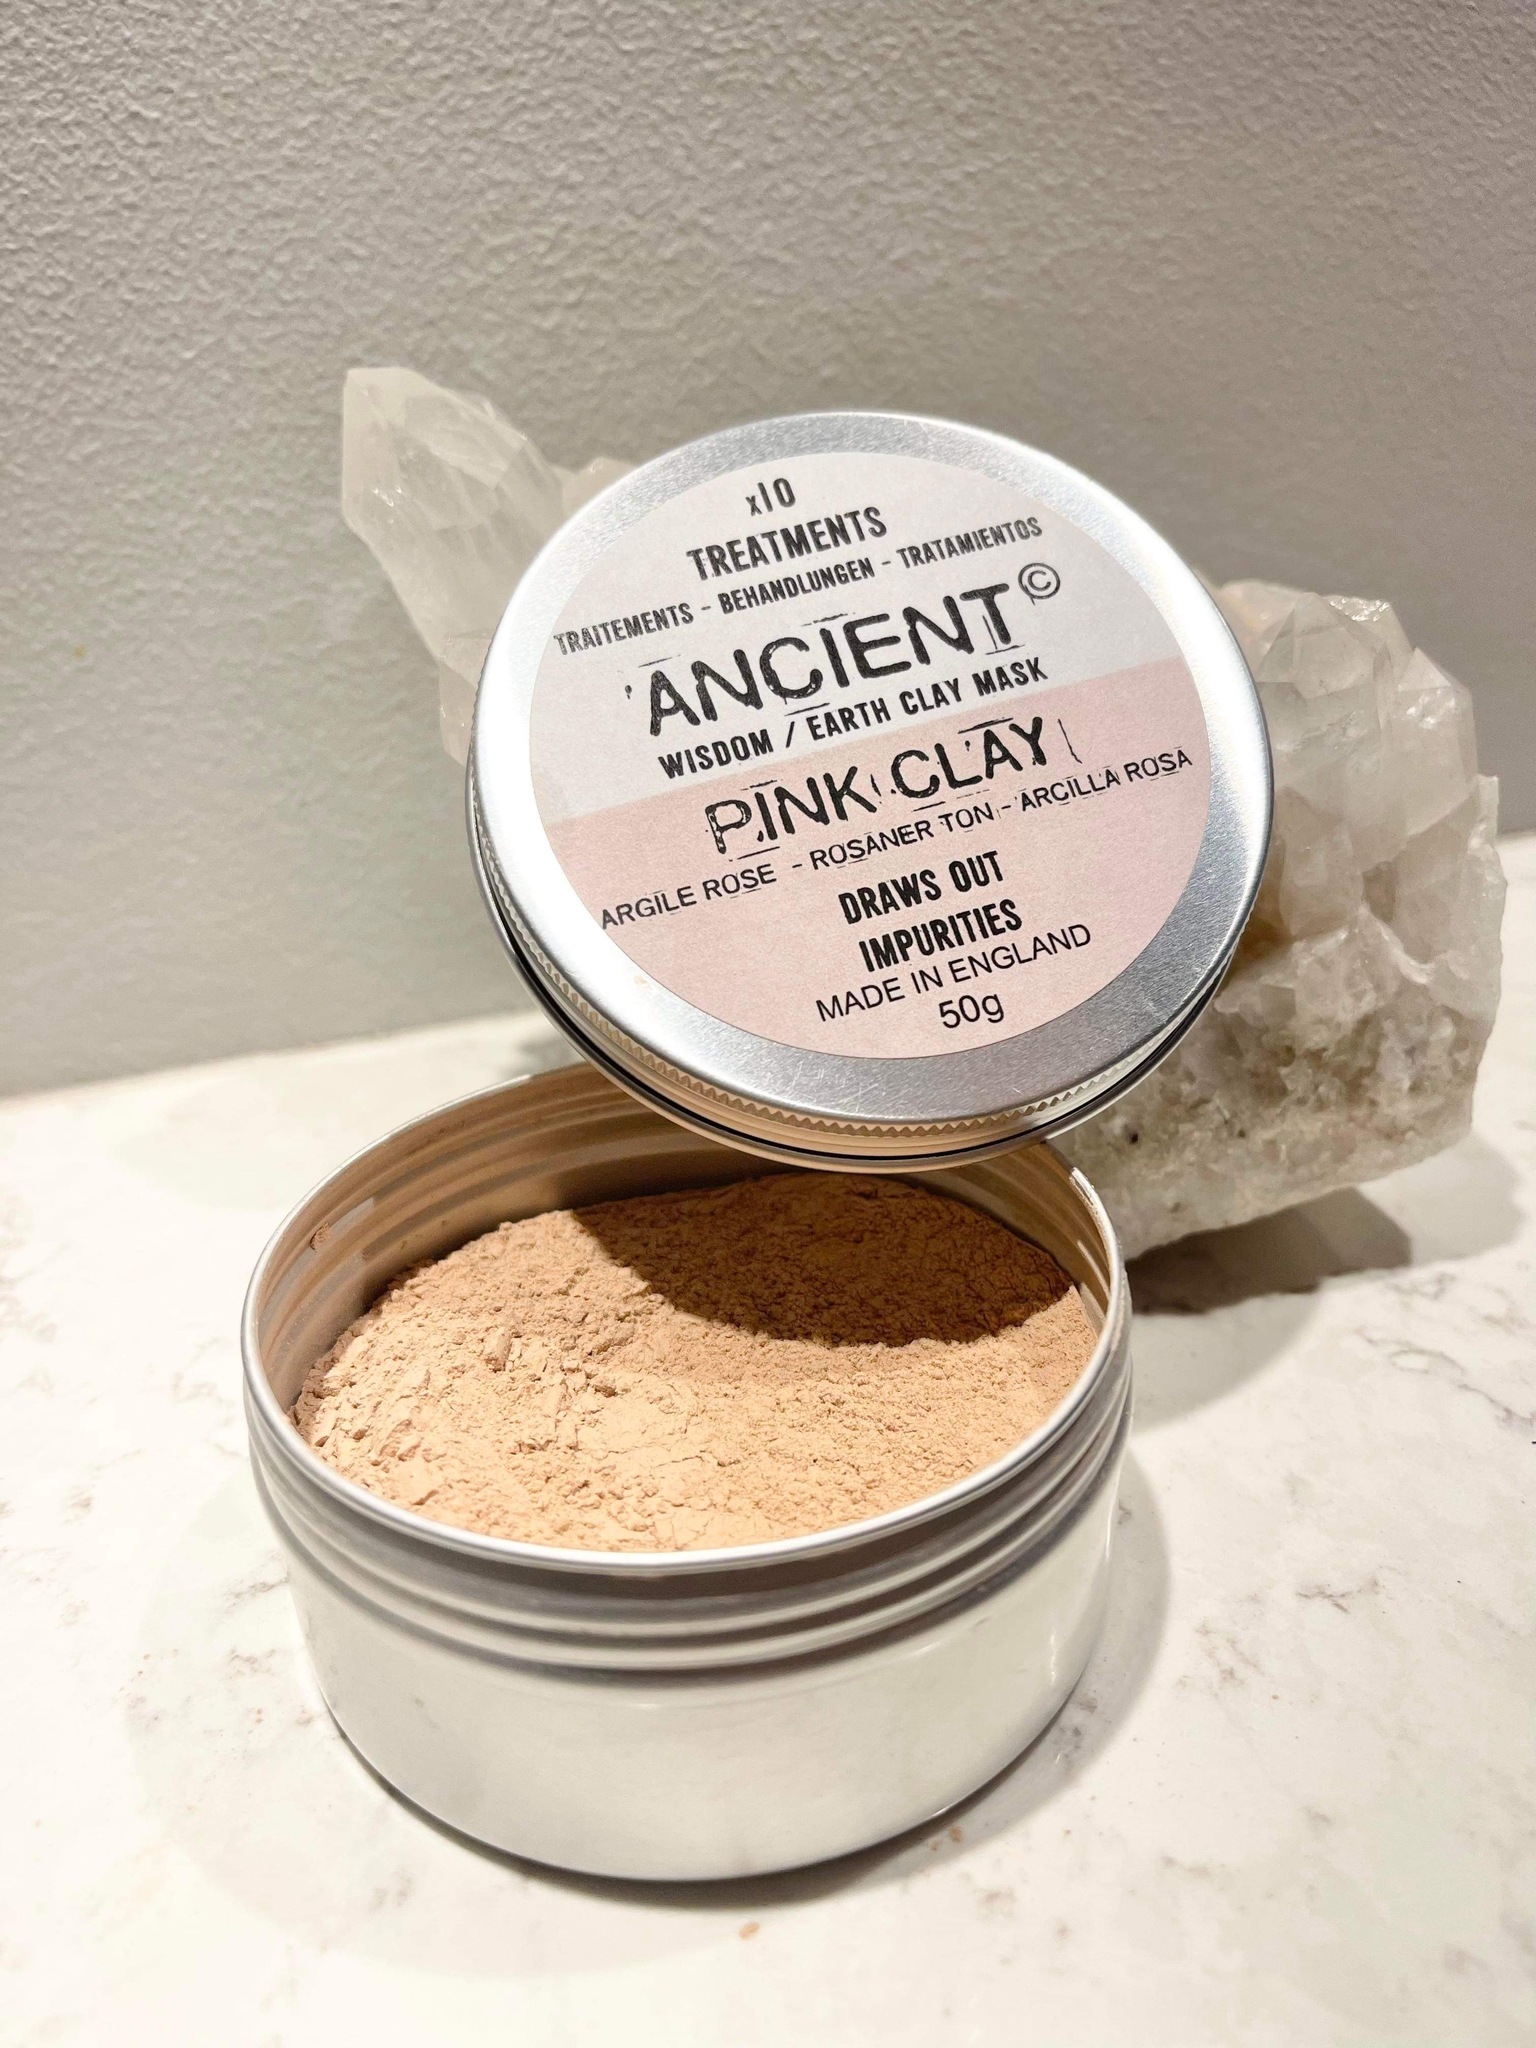 Earth clay mask - Pink clay